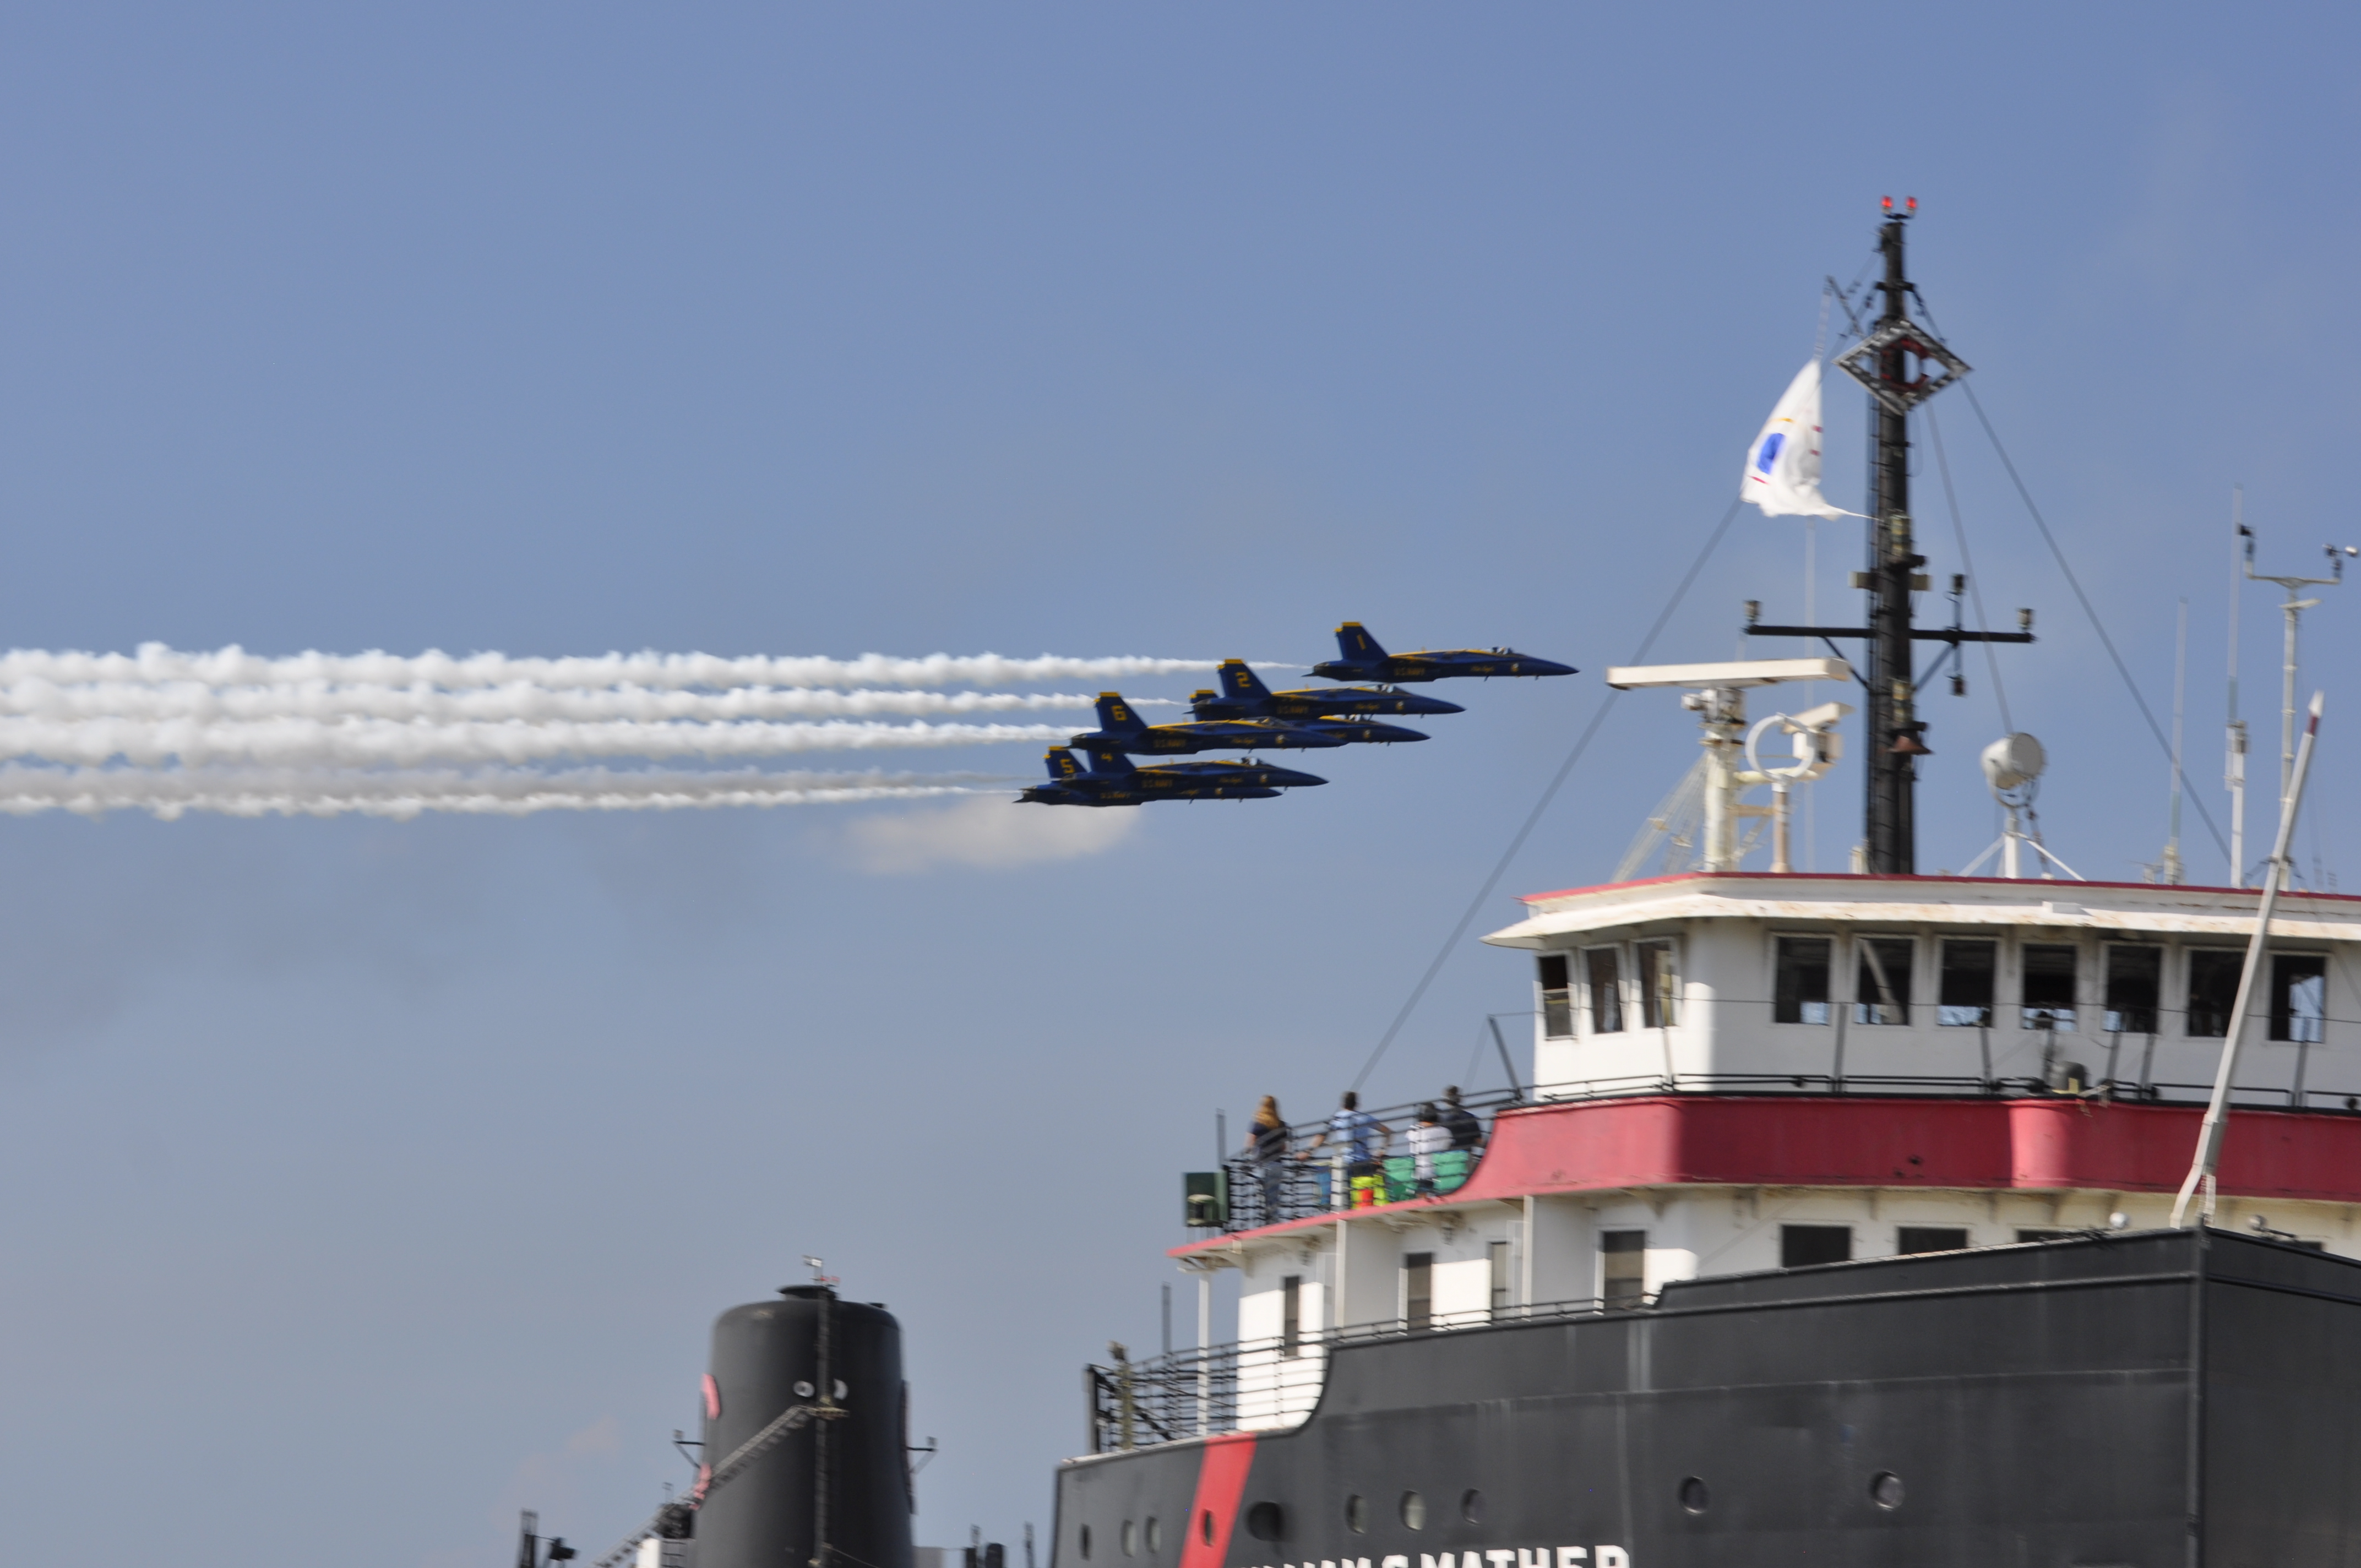 Mather deck party and family picnic options during Air Show highlight Labor Day weekend at Science Center